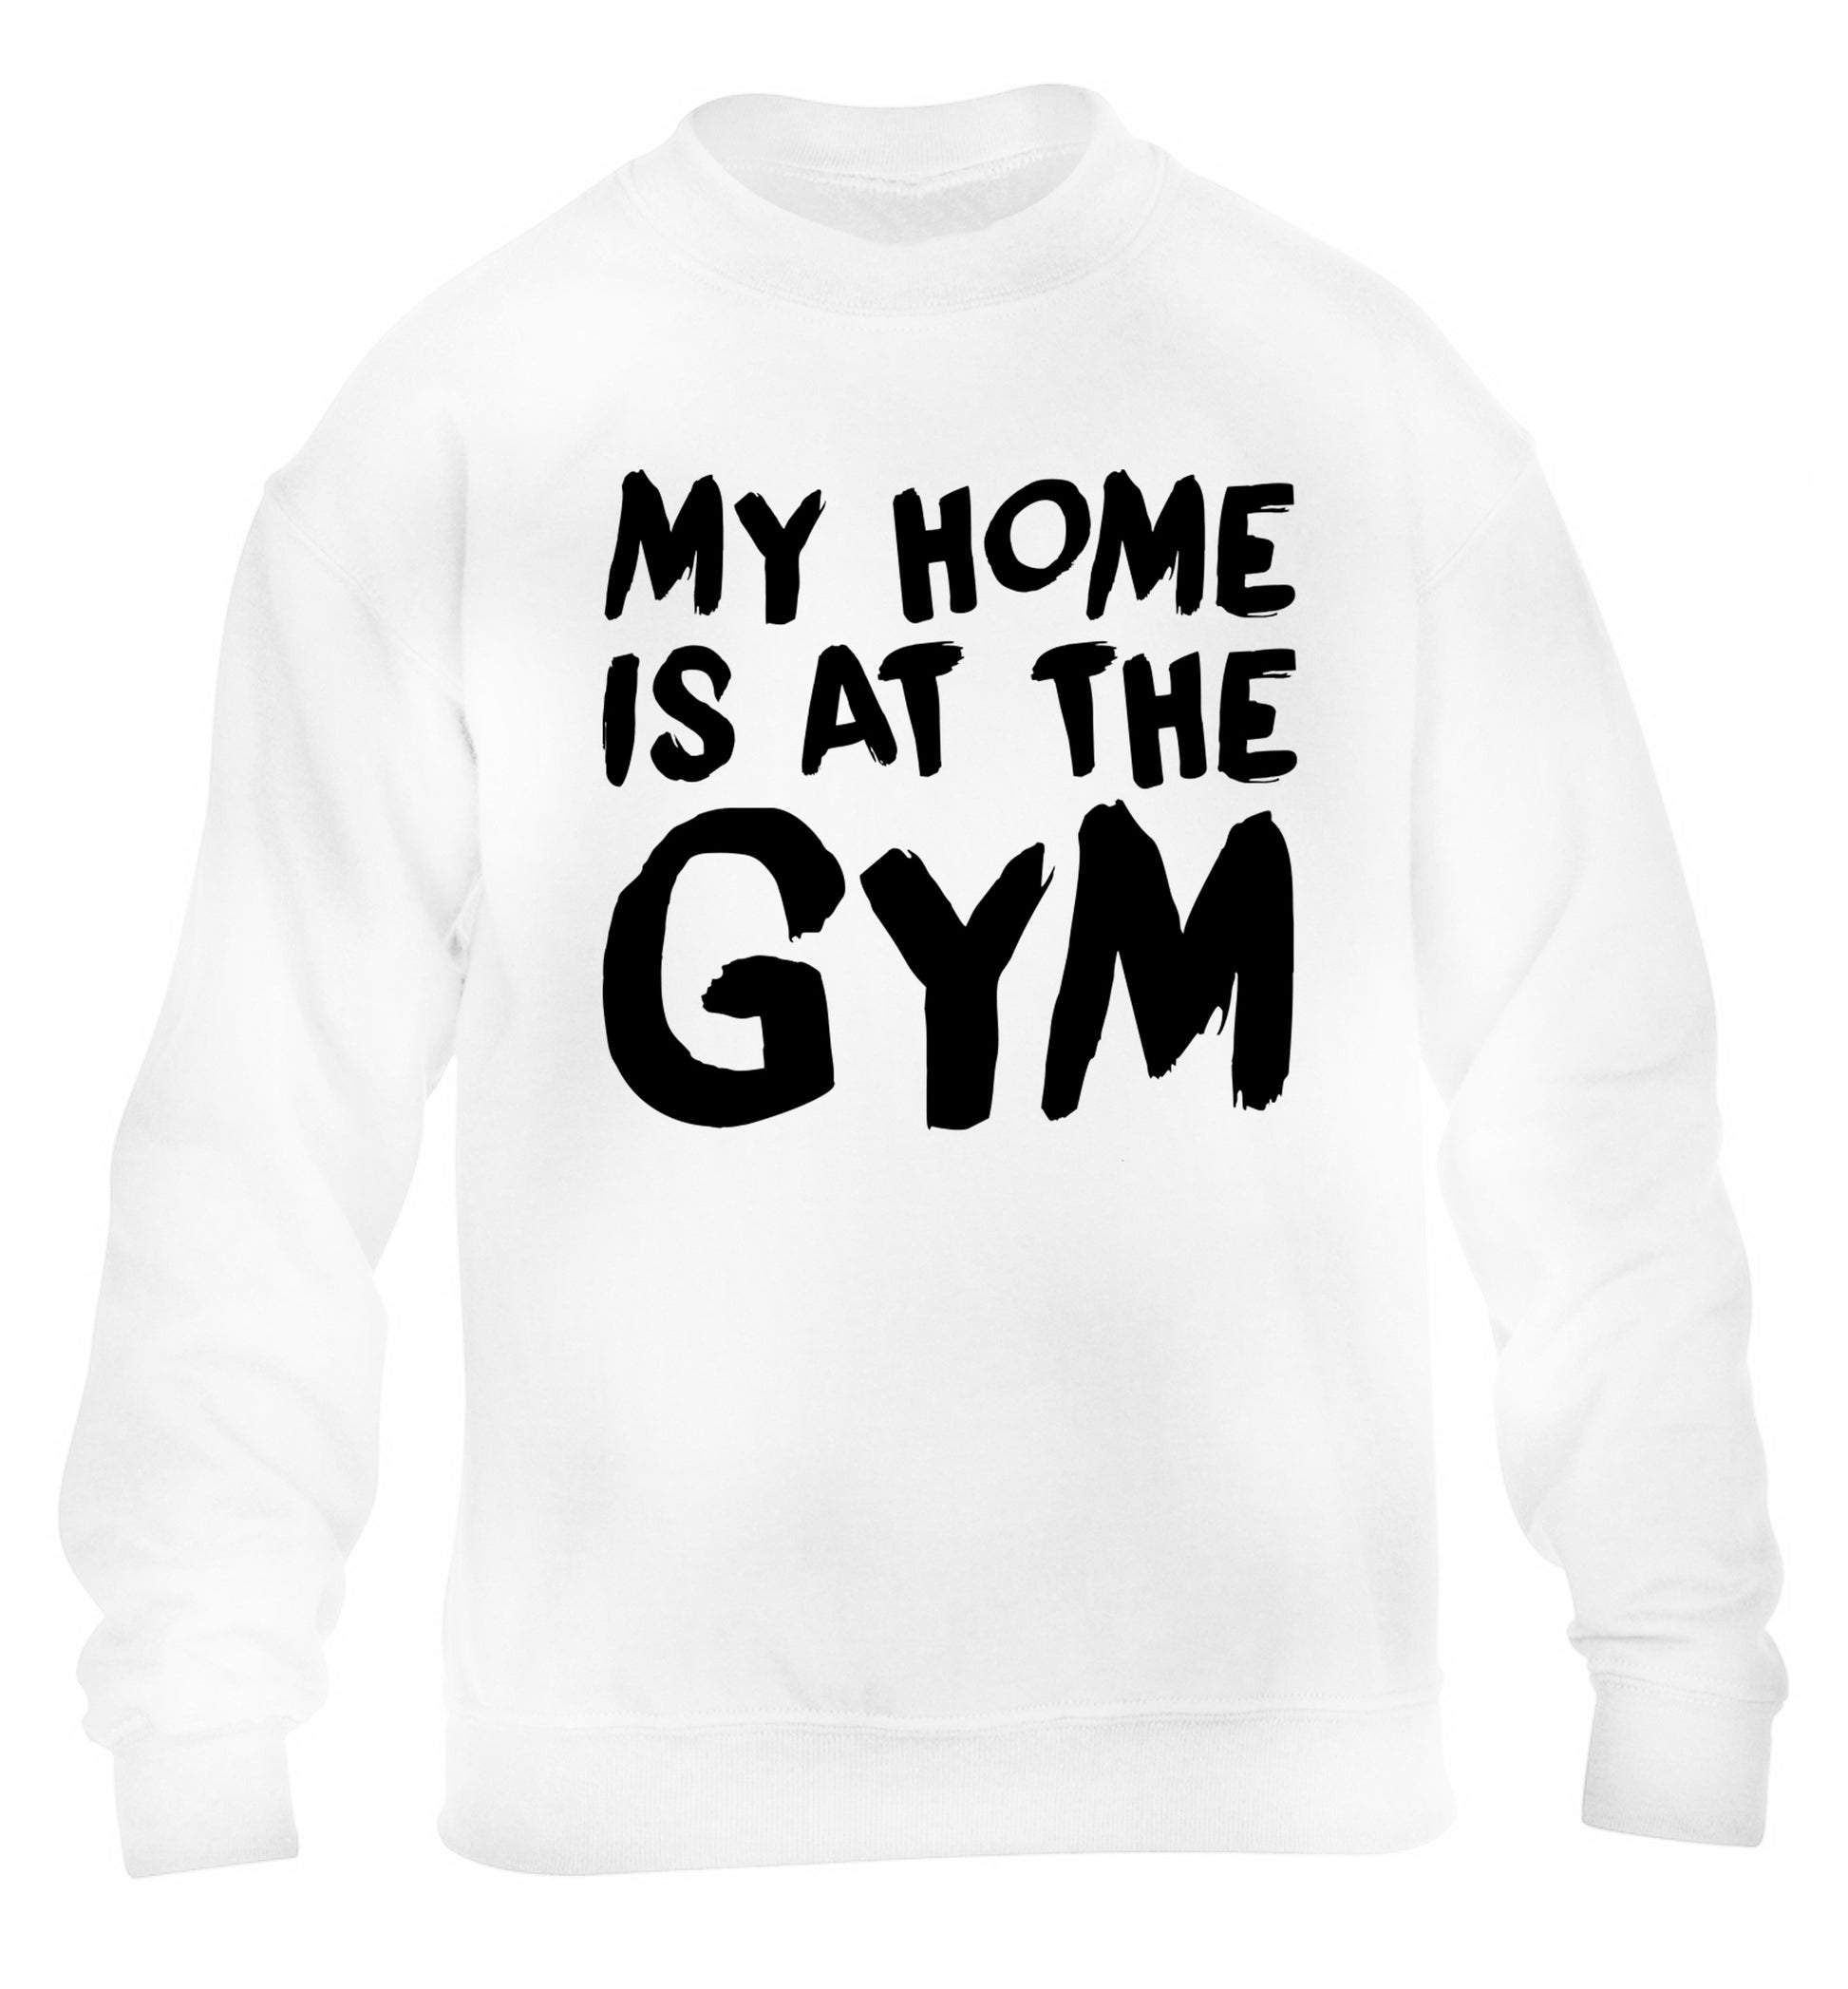 My home is at the gym children's white sweater 12-14 Years